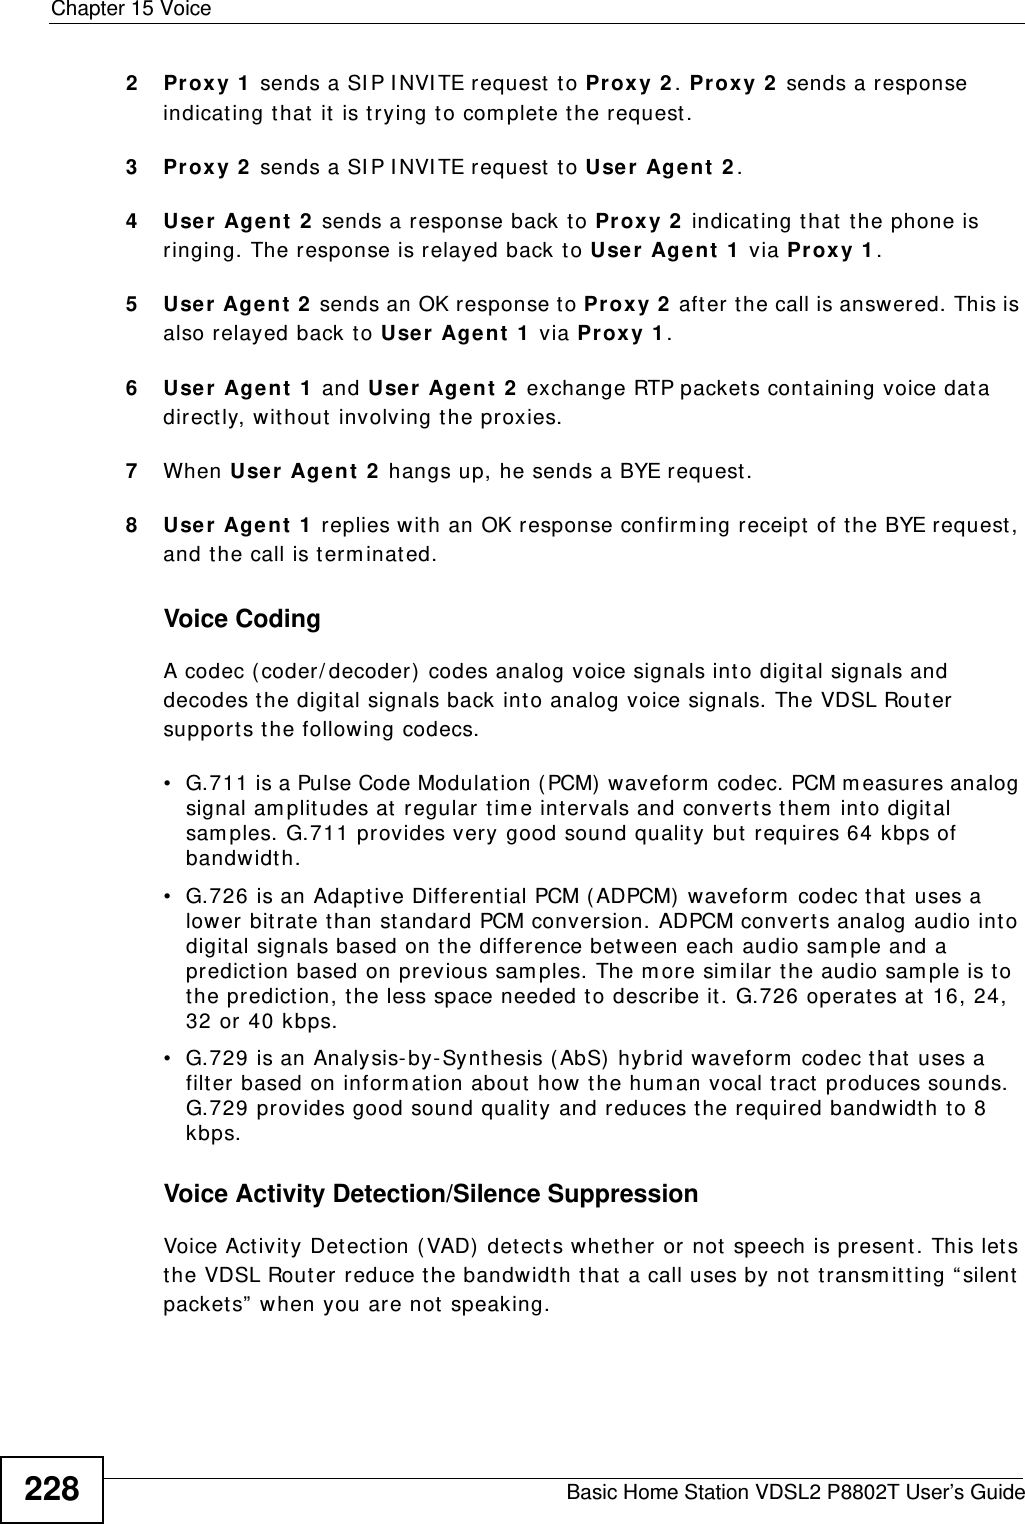 Chapter 15 VoiceBasic Home Station VDSL2 P8802T User’s Guide2282Proxy 1  sends a SI P I NVI TE request  t o Proxy 2 . Proxy 2  sends a response indicating t hat it is t rying t o com plet e t he request.3Proxy 2  sends a SI P I NVI TE request  t o User Agent  2 .4User  Agent 2  sends a response back to Prox y 2  indicating that the phone is ringing. The response is relayed back t o User  Agent 1  via Proxy 1 .5User  Agent  2  sends an OK response to Proxy 2  after the call is answered. This is also relayed back to Use r  Agent  1  via Proxy 1 .6User  Agent 1  and User Agent  2  exchange RTP packets containing voice data directly, without involving the proxies.7When User Agent  2  hangs up, he sends a BYE request . 8User  Agent 1  replies with an OK response confirm ing receipt of t he BYE request, and the call is t erm inat ed.Voice CodingA codec ( coder/ decoder)  codes analog voice signals into digit al signals and decodes t he digital signals back into analog voice signals. The VDSL Router support s the following codecs.• G.711 is a Pulse Code Modulation ( PCM)  waveform  codec. PCM m easur es analog signal am plitudes at  regular tim e intervals and converts t hem  into digit al sam ples. G.711 provides very good sound quality but  requires 64 kbps of bandwidt h.• G.726 is an Adaptive Different ial PCM ( ADPCM) waveform  codec that uses a lower bitrate than st andard PCM conversion. ADPCM converts analog audio into digital signals based on the difference bet ween each audio sam ple and a predict ion based on previous sam ples. The m ore sim ilar t he audio sam ple is t o the predict ion, the less space needed t o describe it . G.726 operates at 16, 24, 32 or 40 kbps. • G.729 is an Analysis- by- Synthesis ( AbS)  hybrid waveform  codec t hat uses a filter based on inform at ion about  how the hum an vocal t ract  produces sounds. G.729 provides good sound quality and reduces t he required bandwidth to 8 kbps.Voice Activity Detection/Silence SuppressionVoice Act ivit y Det ect ion ( VAD) det ect s whet her or not  speech is present. This lets the VDSL Rout er reduce t he bandwidth that a call uses by not  t ransm it t ing “ silent packets”  w hen you are not speaking.